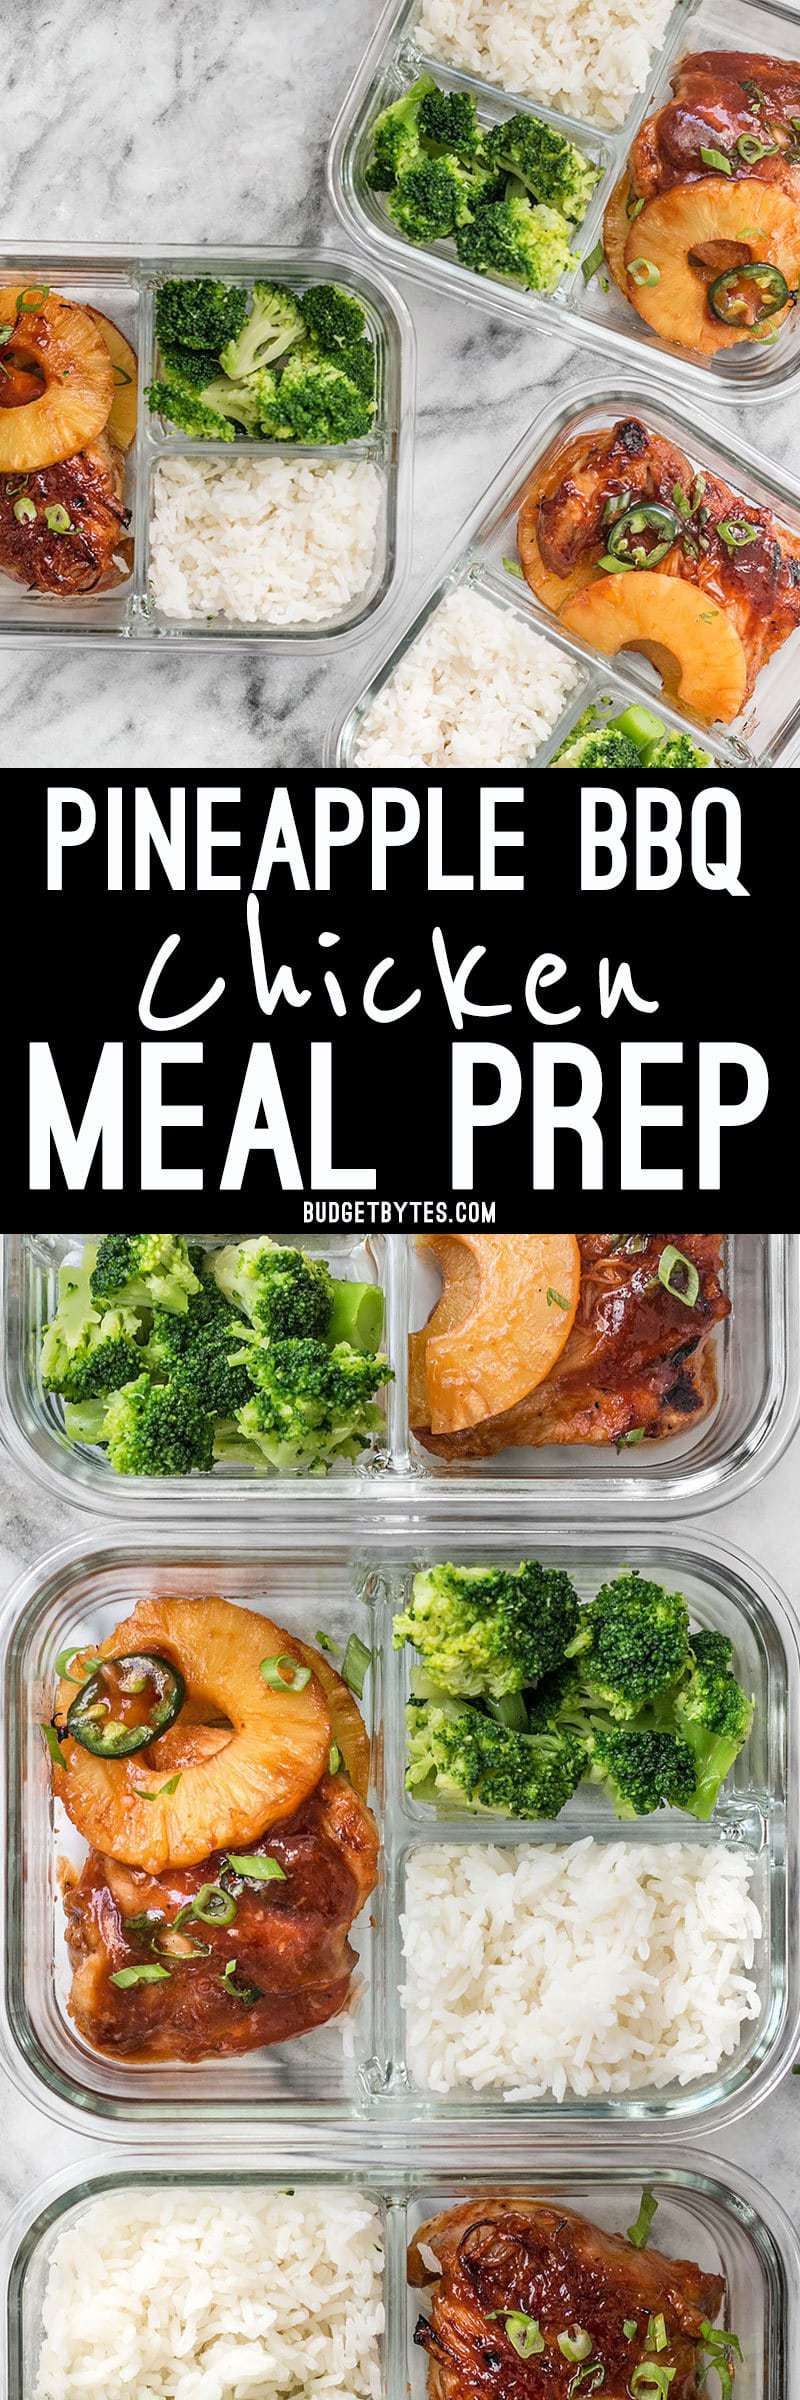 https://www.budgetbytes.com/wp-content/uploads/2017/10/Pineapple-BBQ-Chicken-Meal-Prep-Collage.jpg